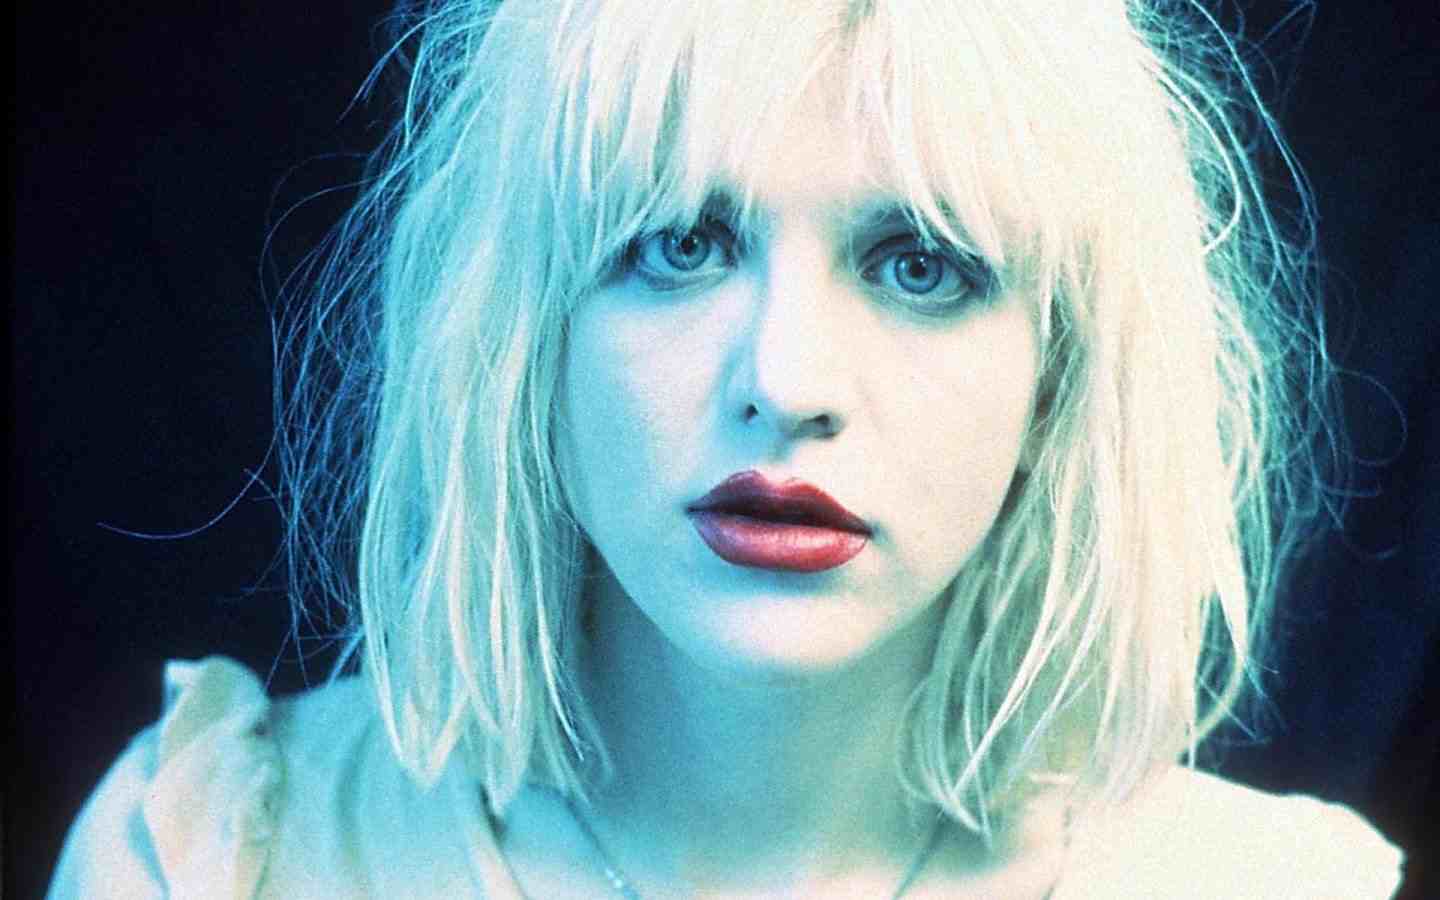 Courtney Love Joins Billie Joe Armstrong On Stage - Performs Three Covers